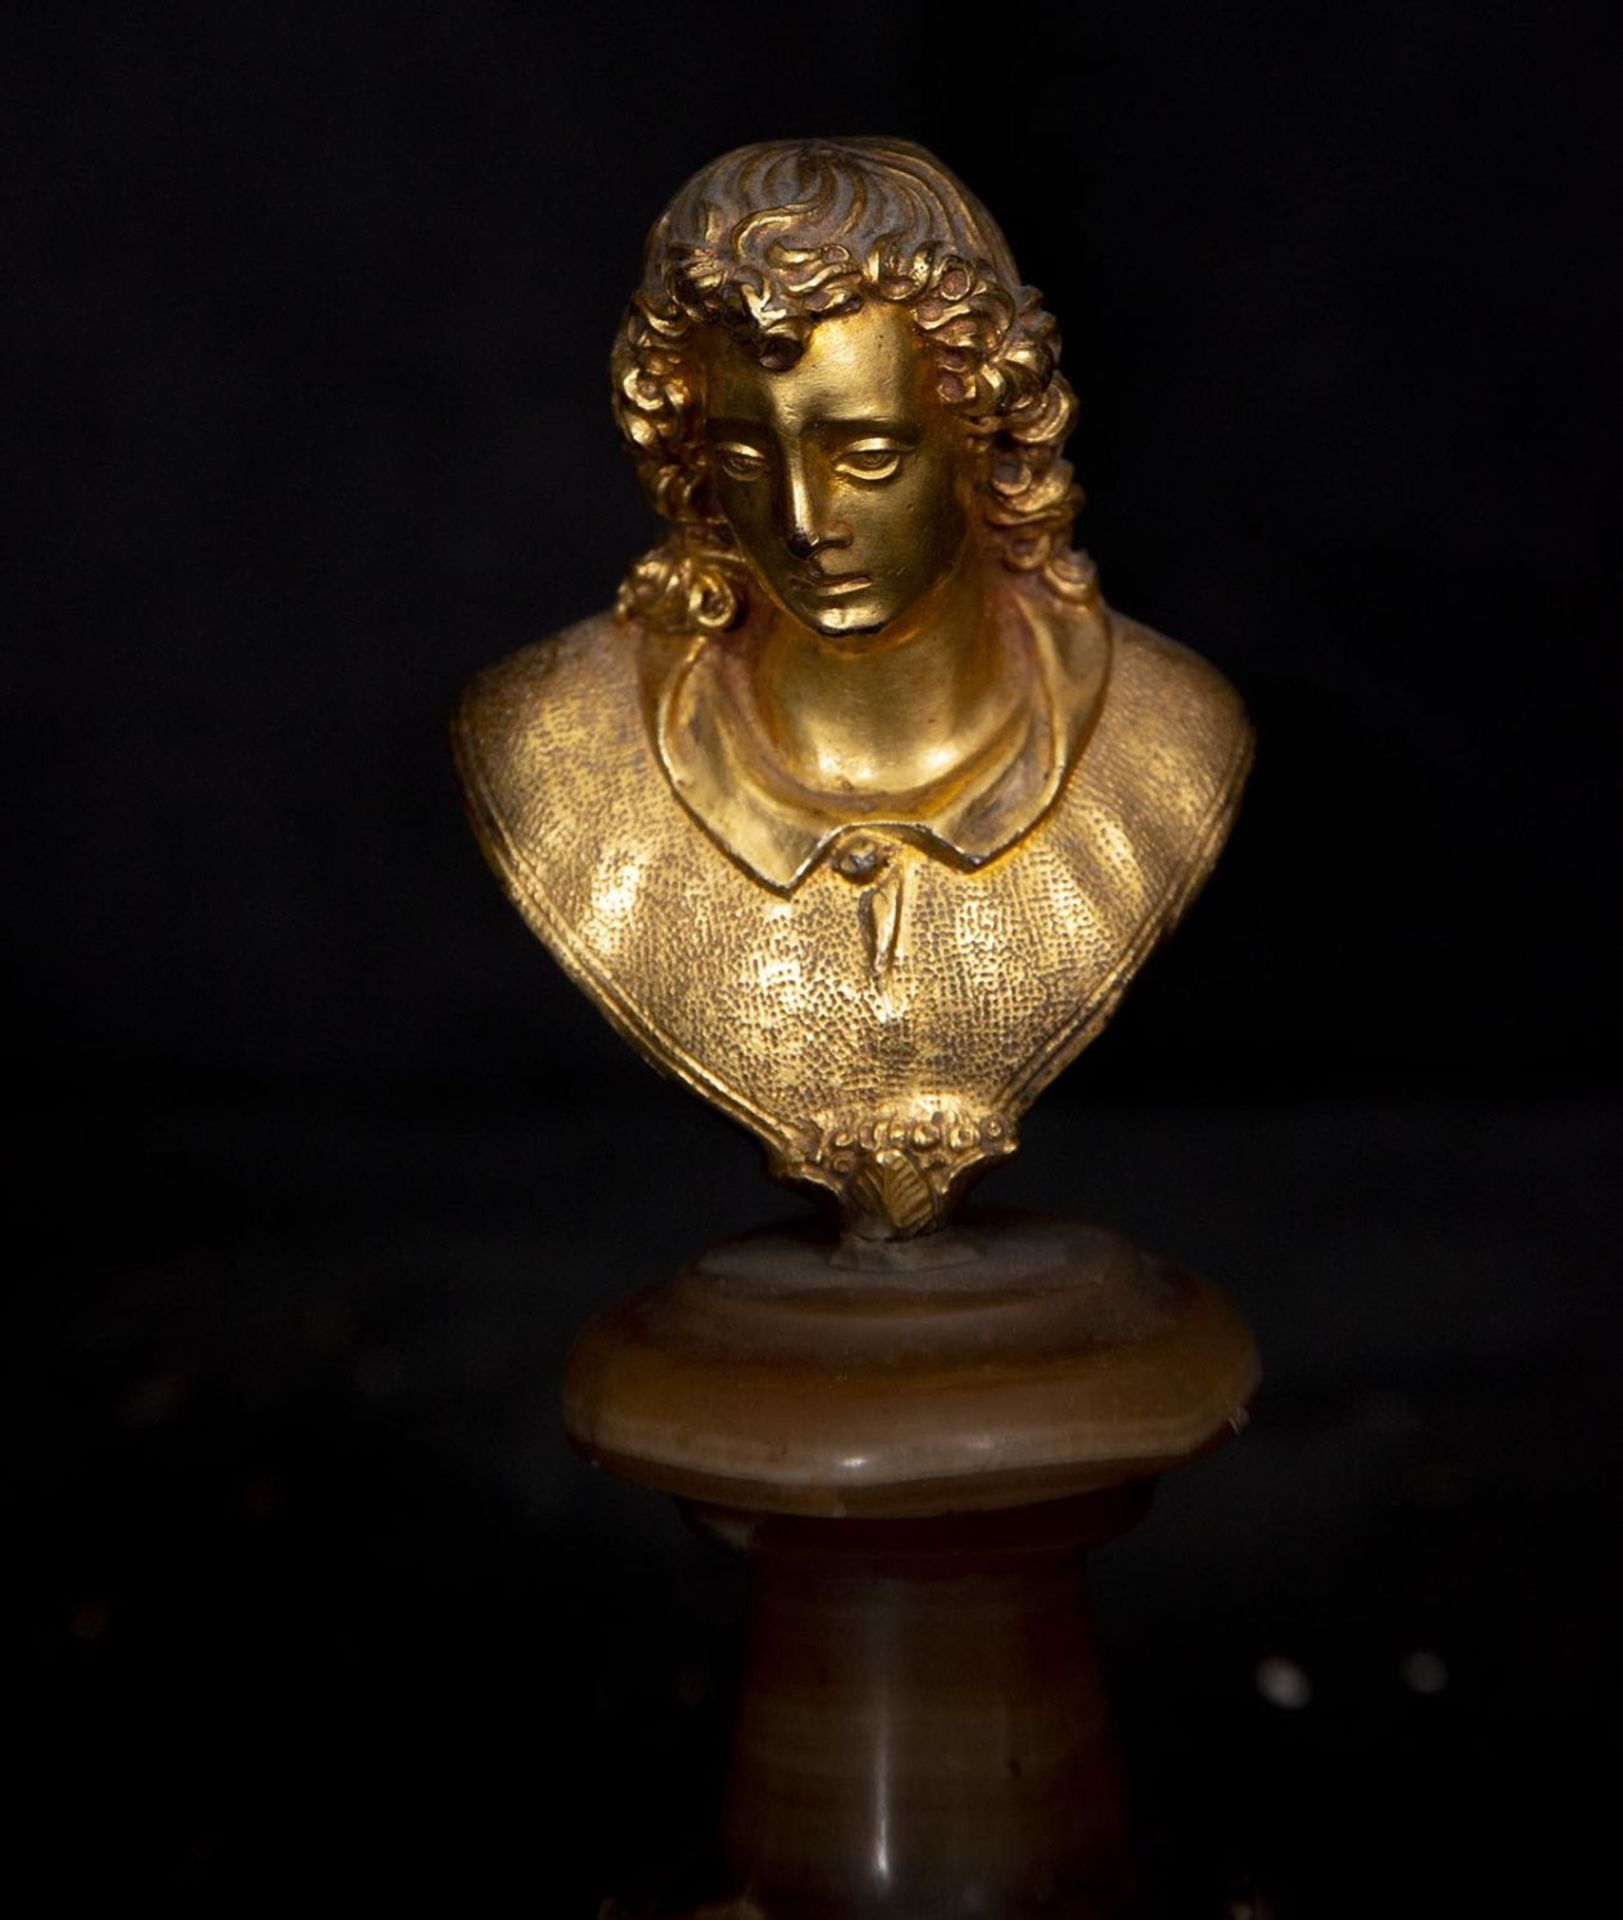 Exquisite bust in gilt bronze with onyx base, Italian school of Alessandro Algardi, Italy, 17th cent - Image 2 of 5